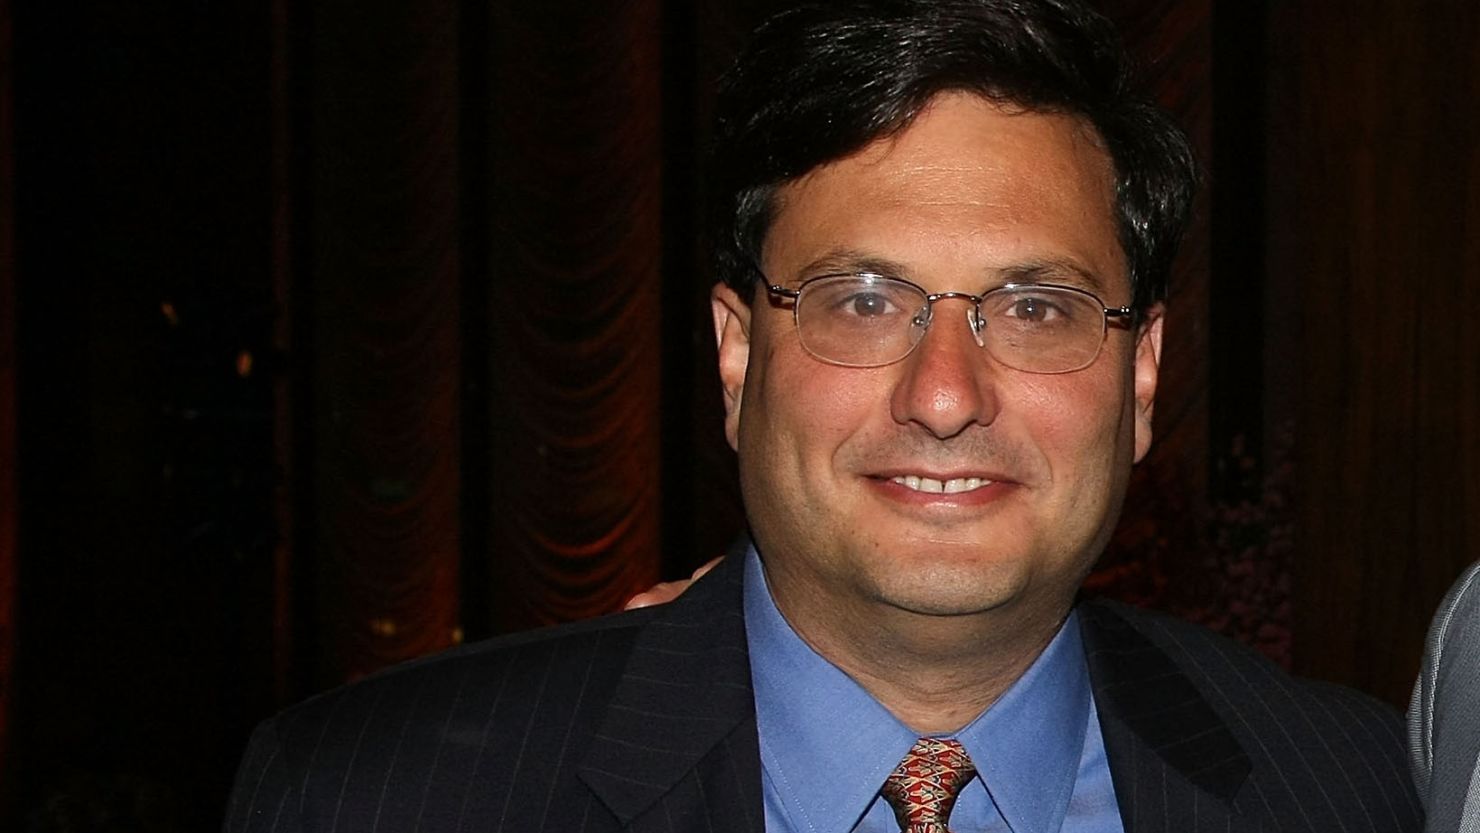 Ron Klain, pictured above, is the newly picked Ebola czar. But does the U.S. also need a new Surgeon General?